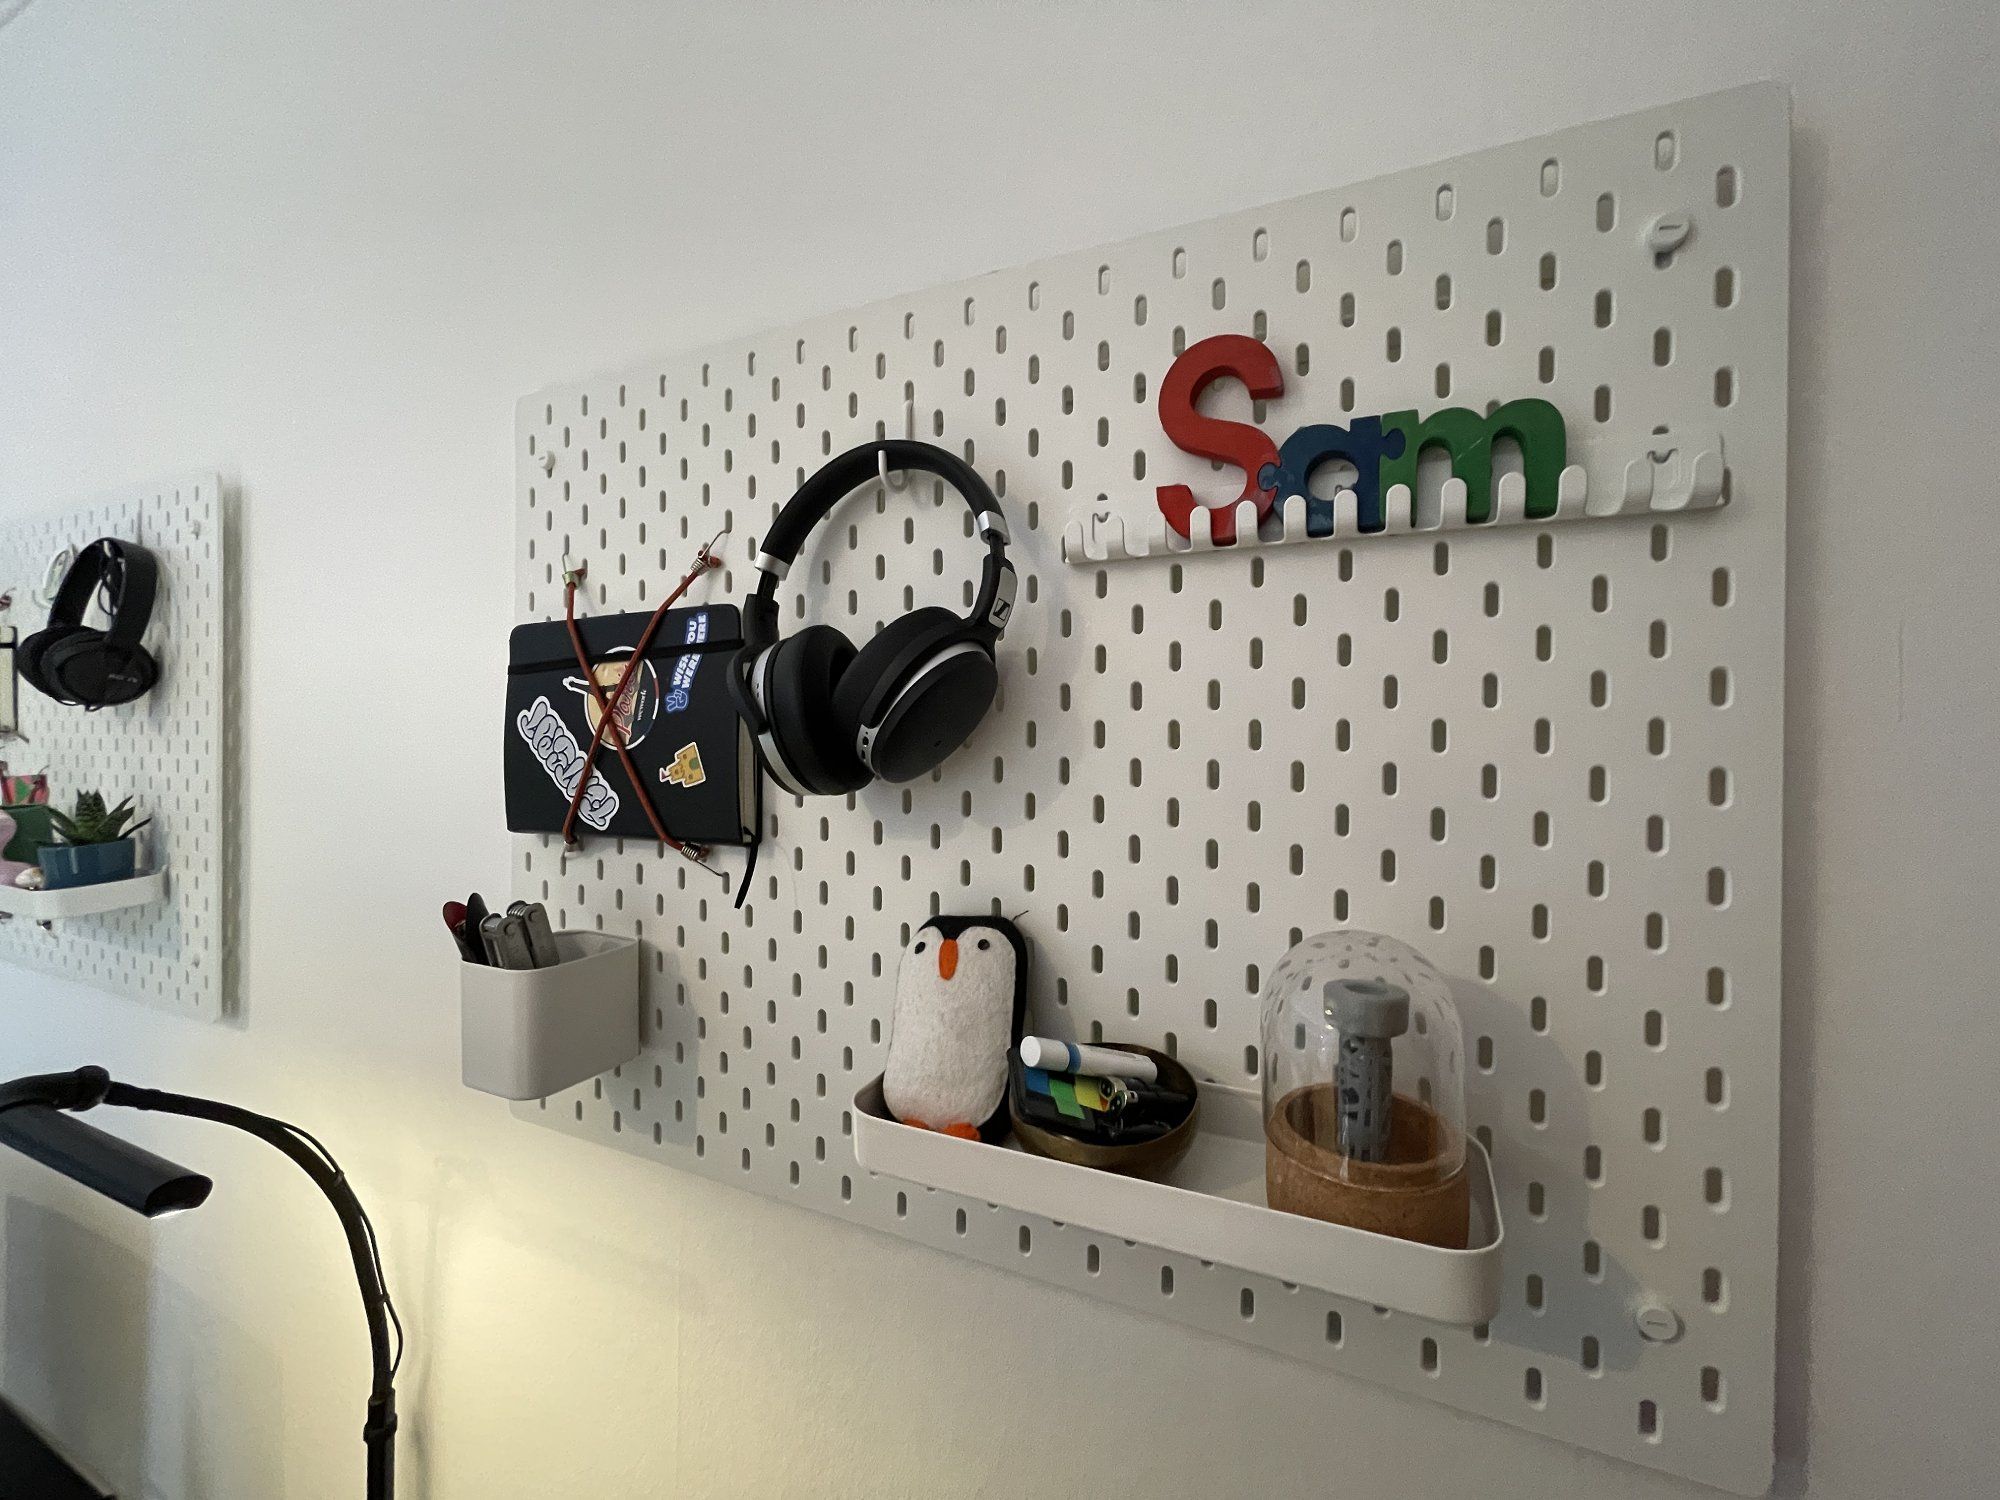 Two pegboards on the wall, neatly holding headphones, stationery, and various decor elements